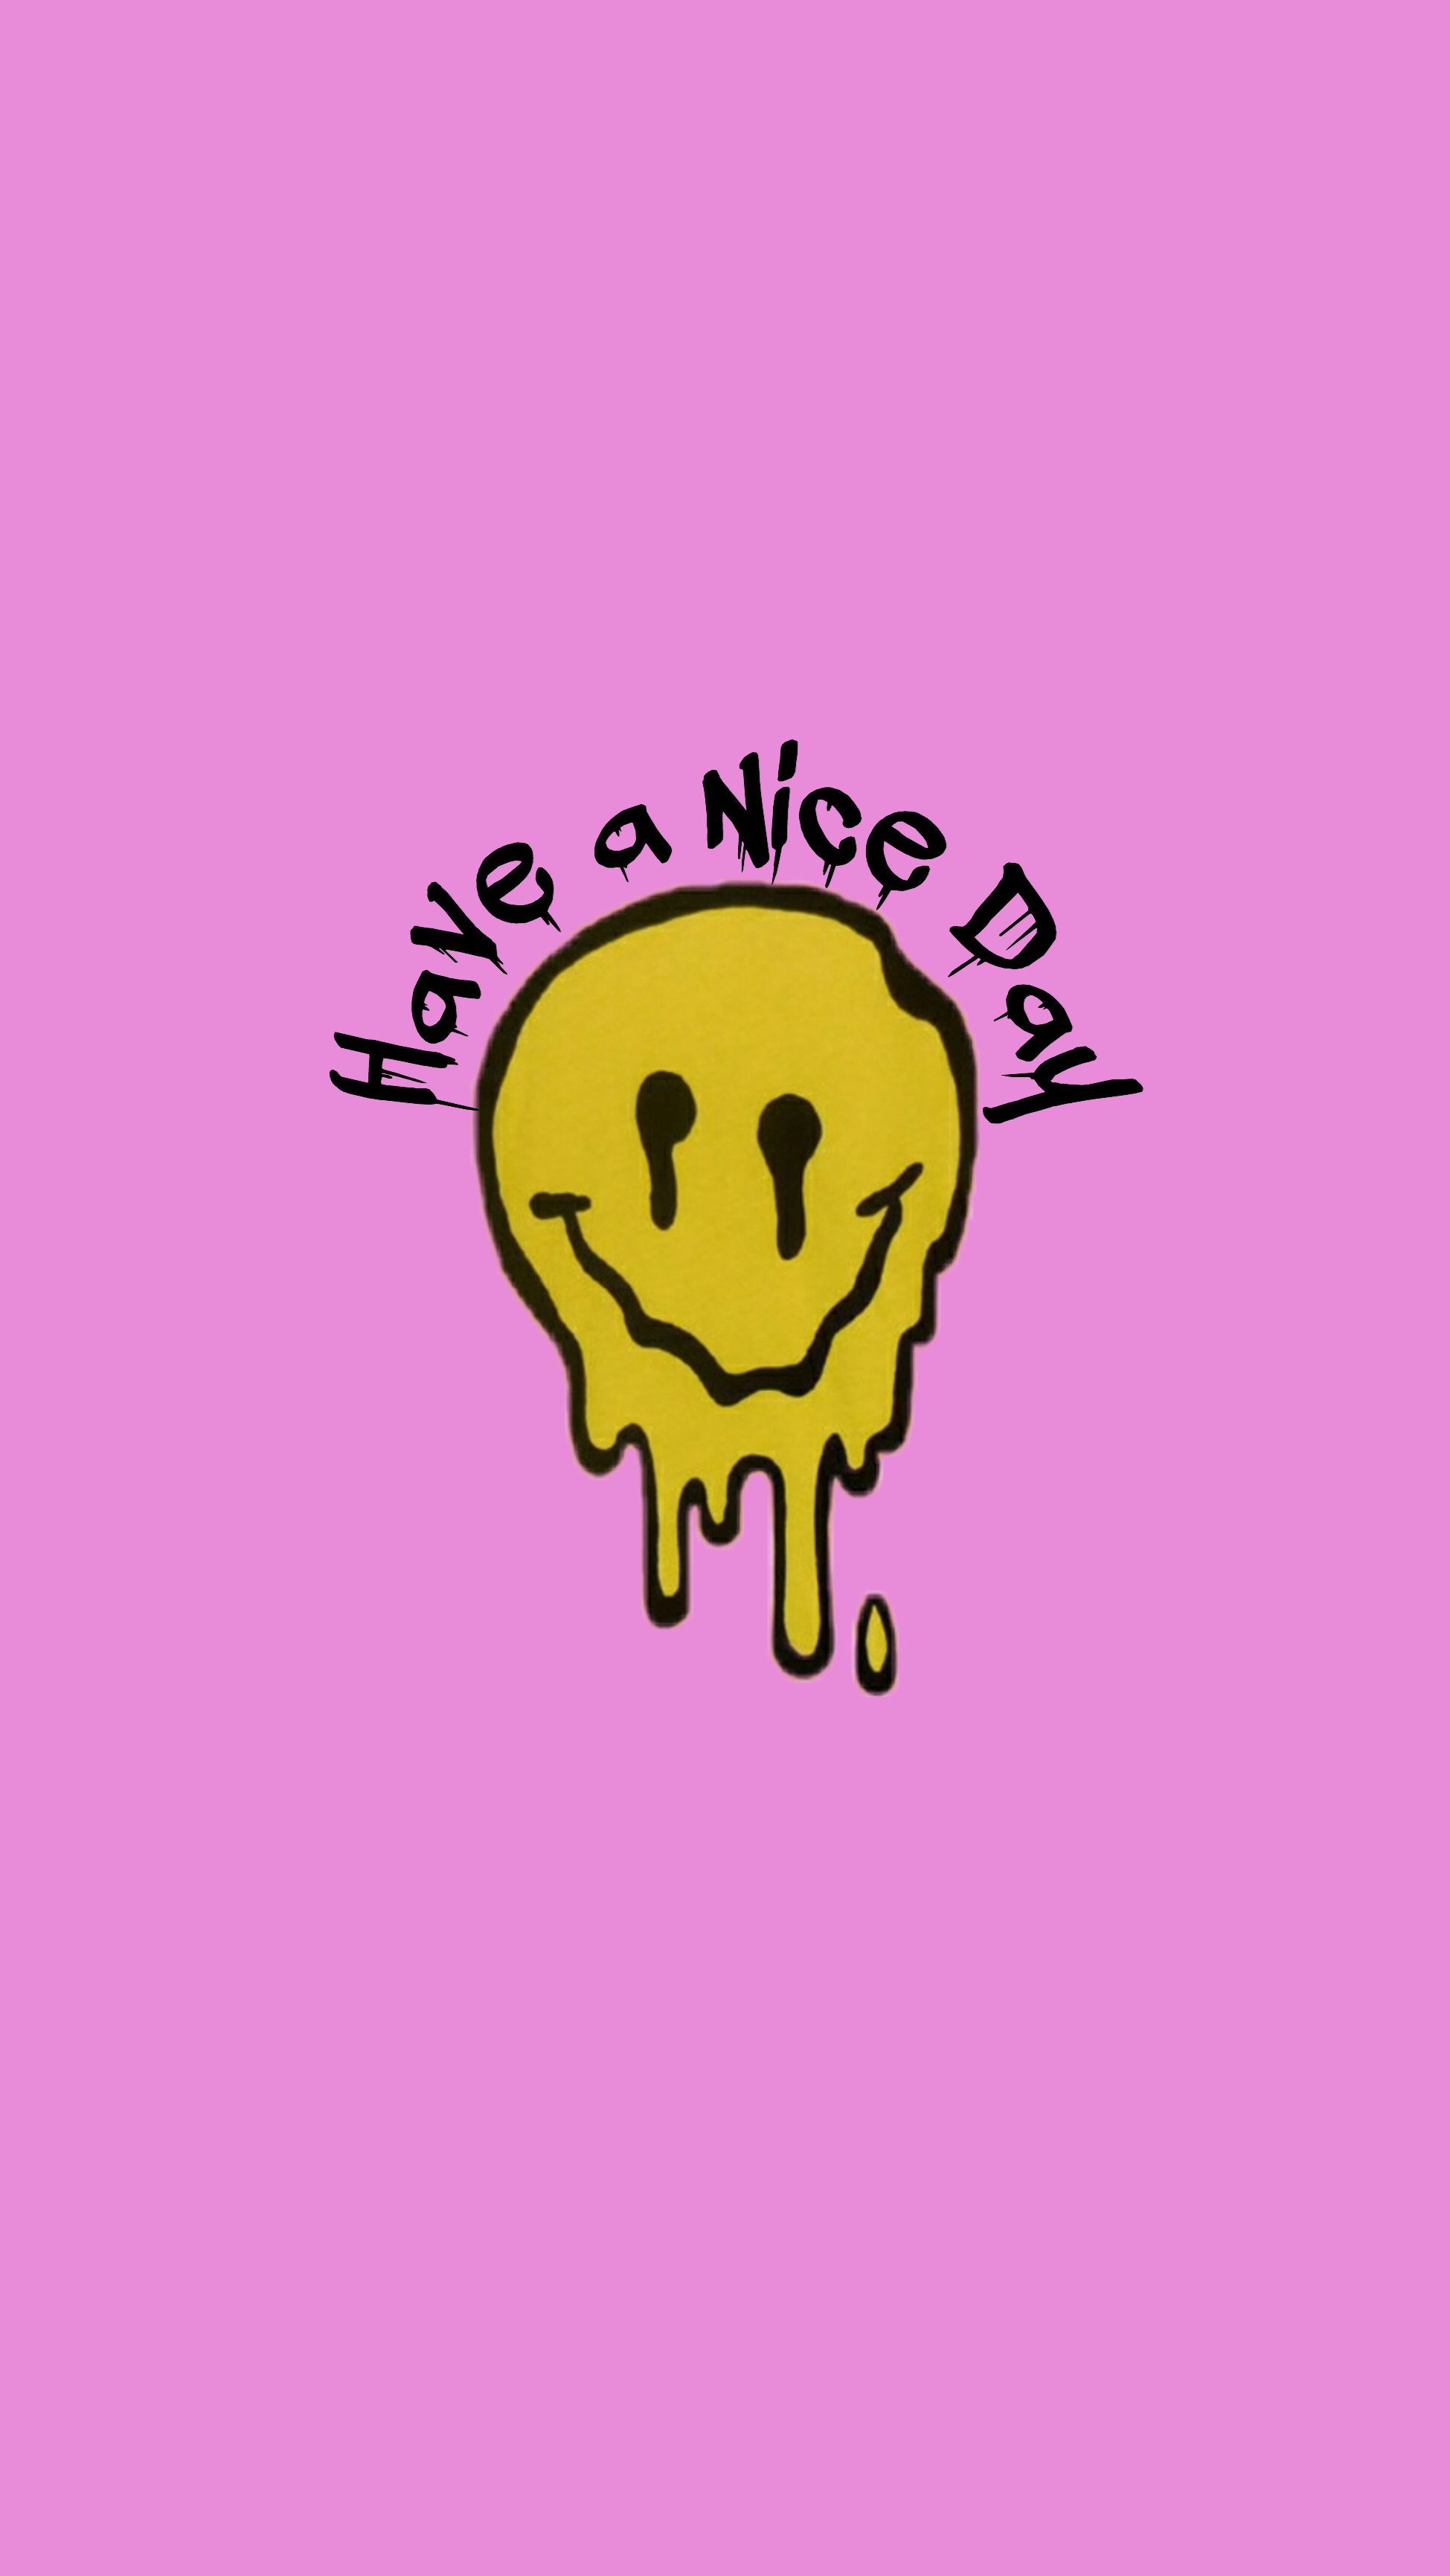 Dripping Smiley Face. iPhone wallpaper quotes inspirational, Edgy wallpaper, Cute wallpaper background